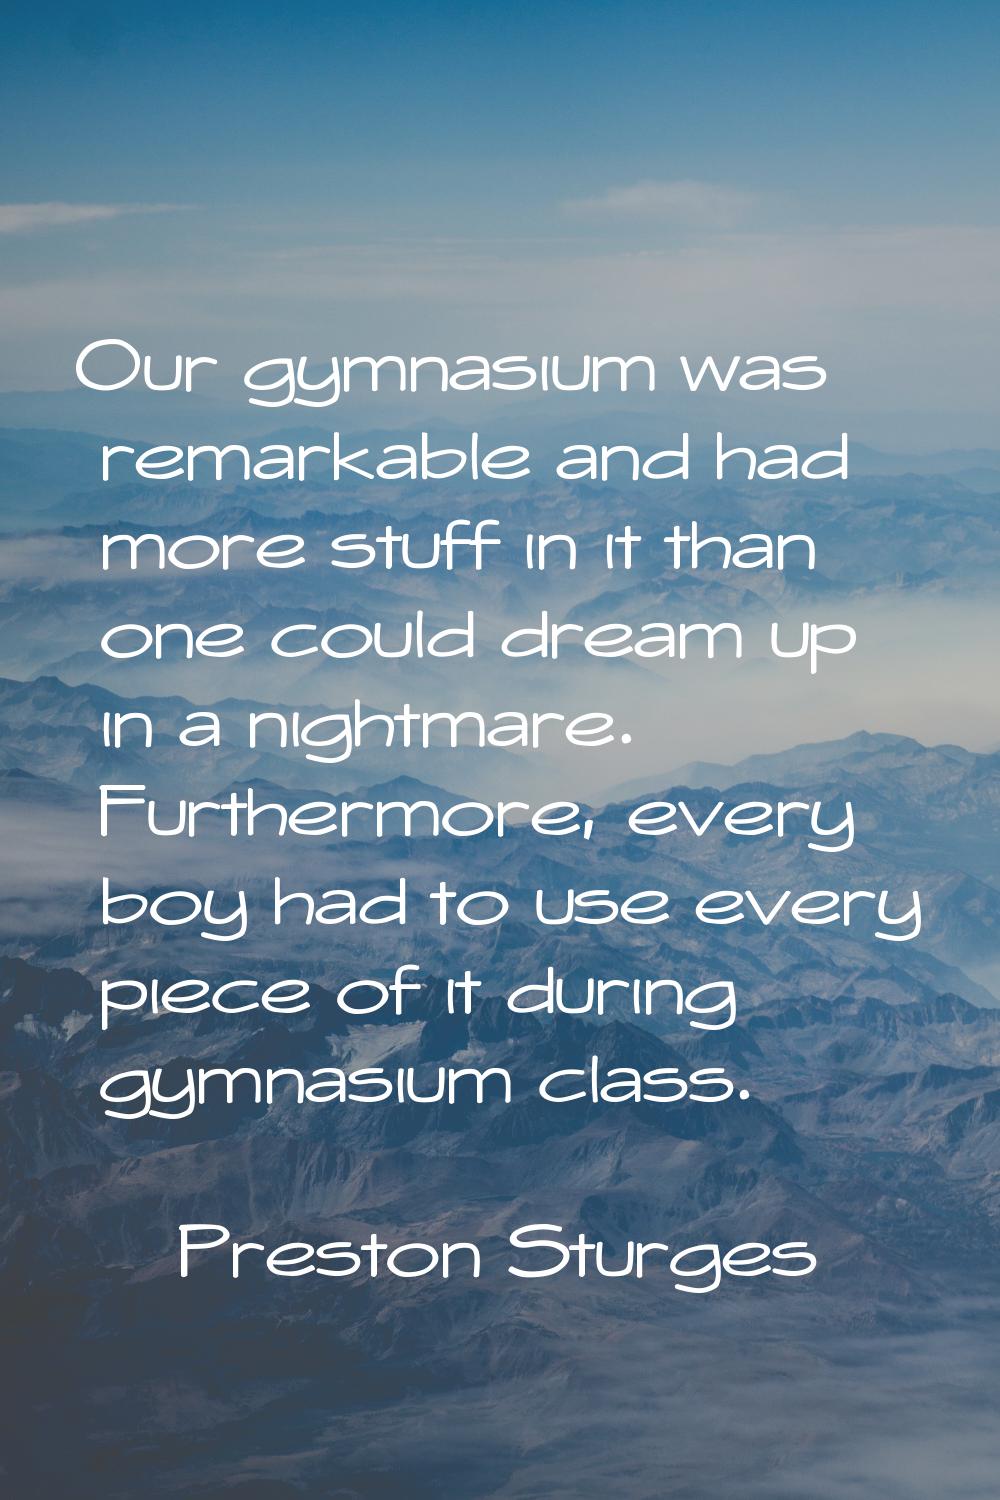 Our gymnasium was remarkable and had more stuff in it than one could dream up in a nightmare. Furth